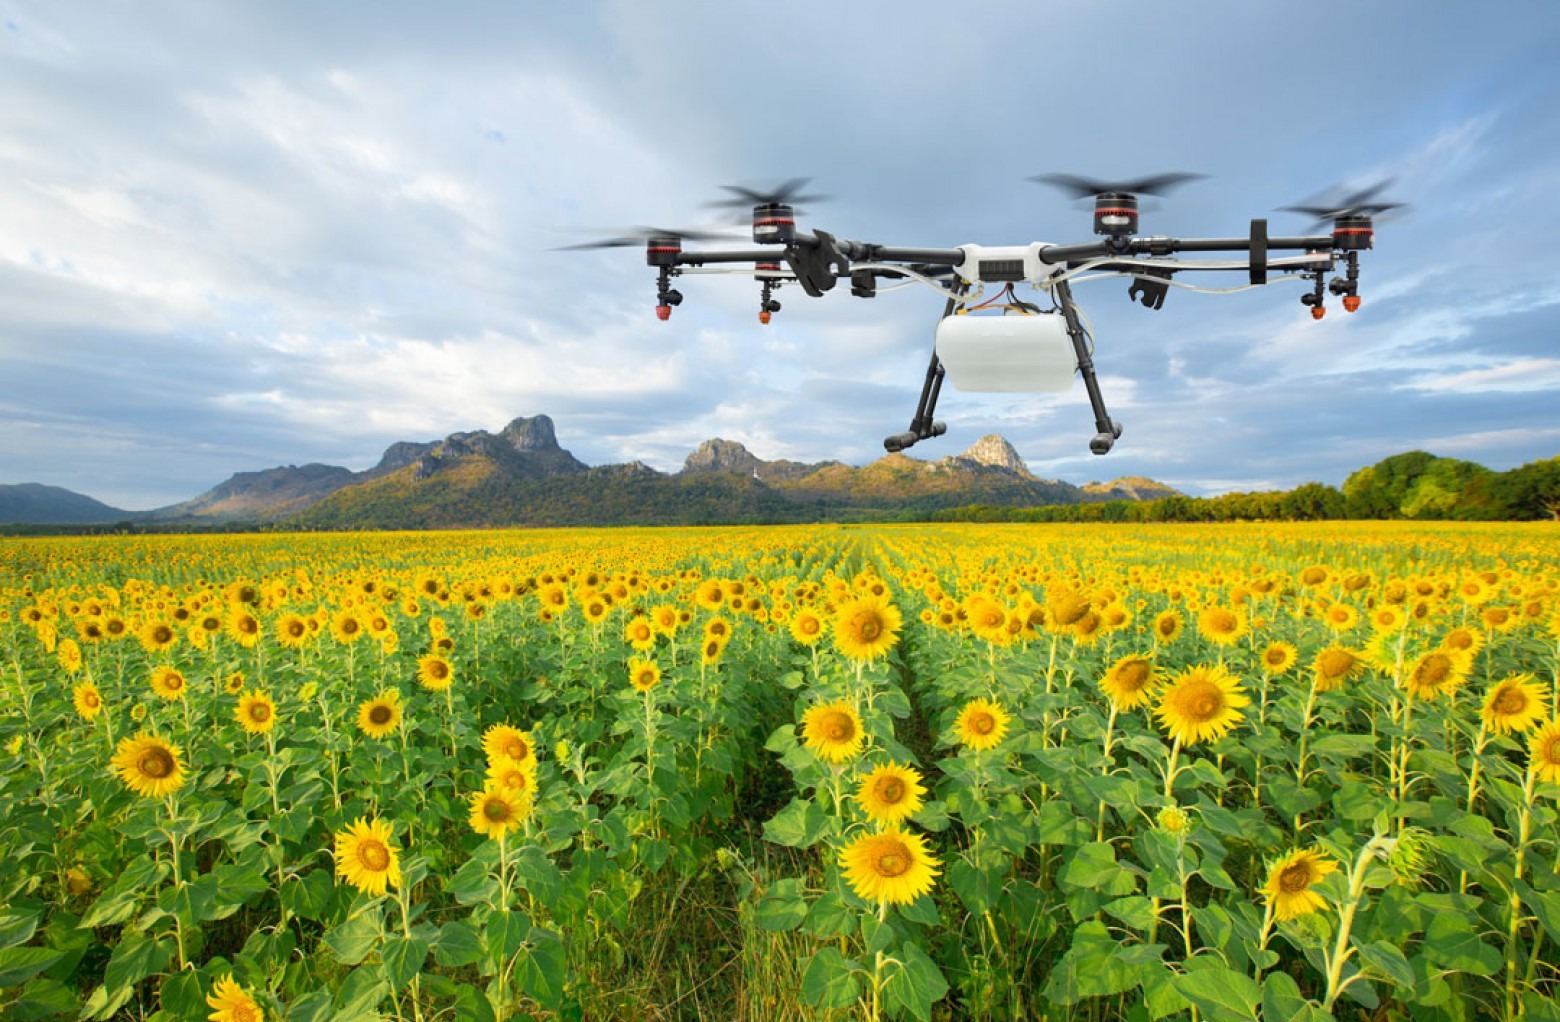 Drone in an agriculture application over a field of sun flowers.